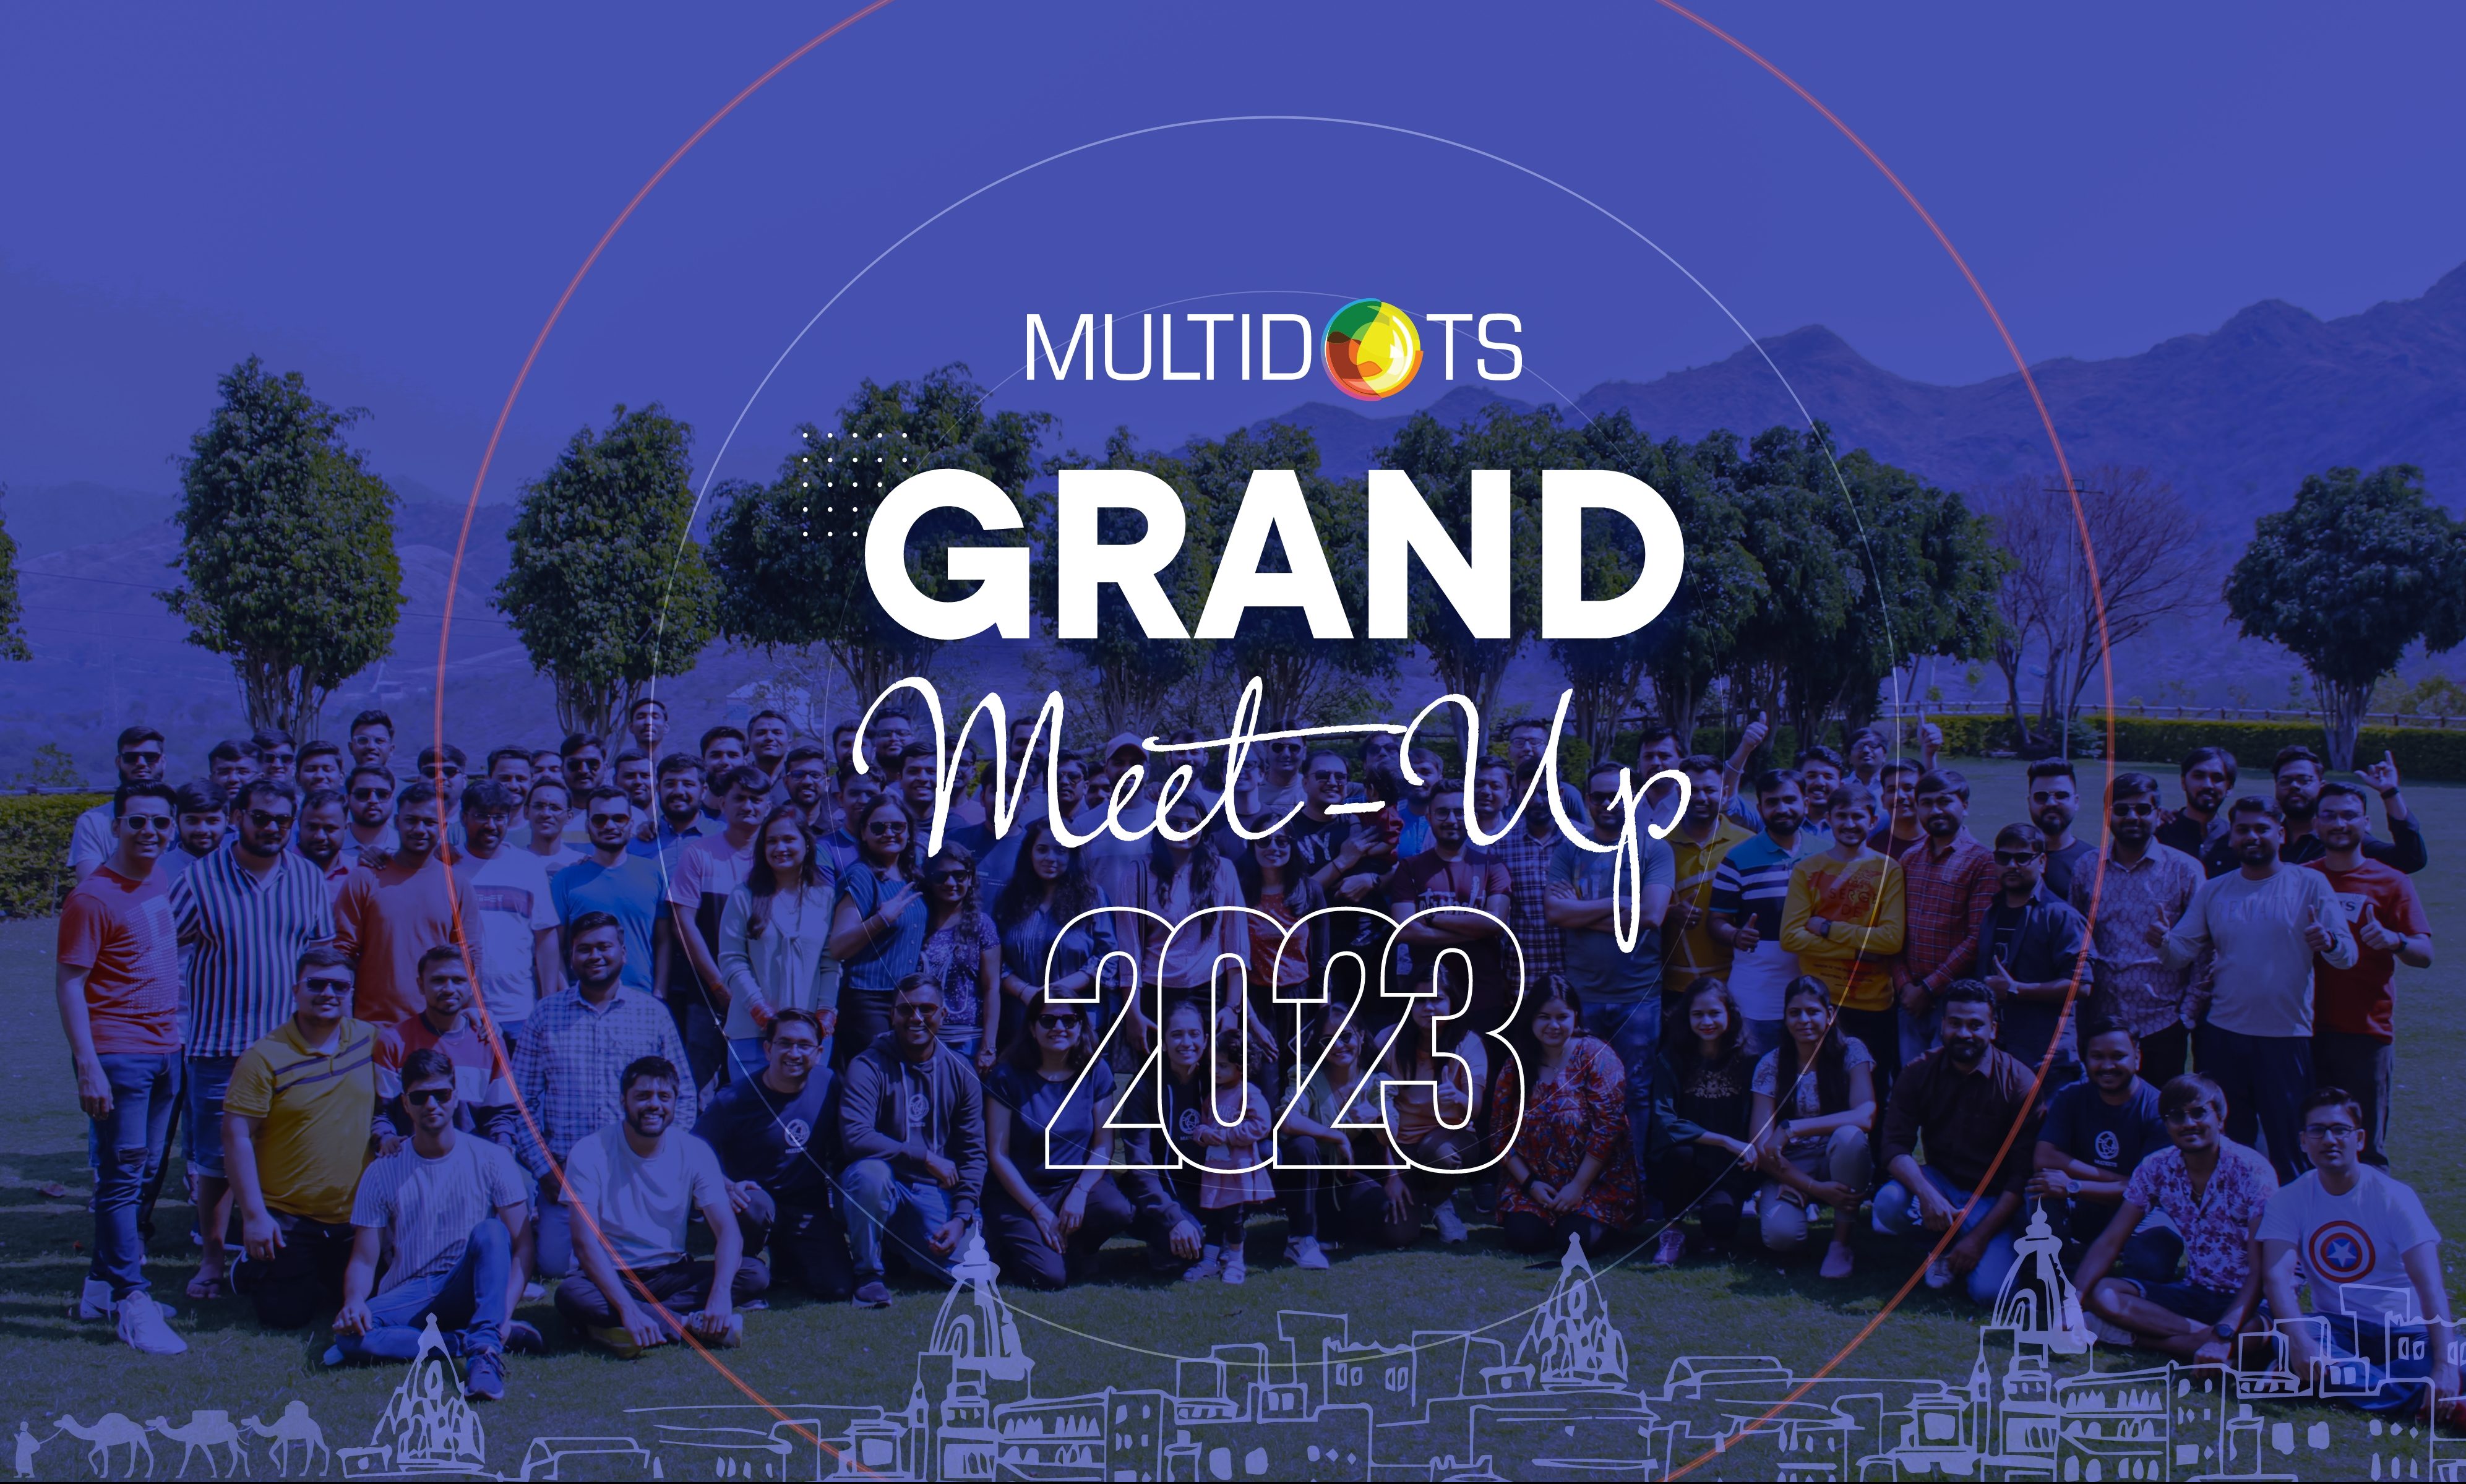 a-recap-of-multidots-grand-meetup-2023-insights-learnings-and-fun-featured-image Img